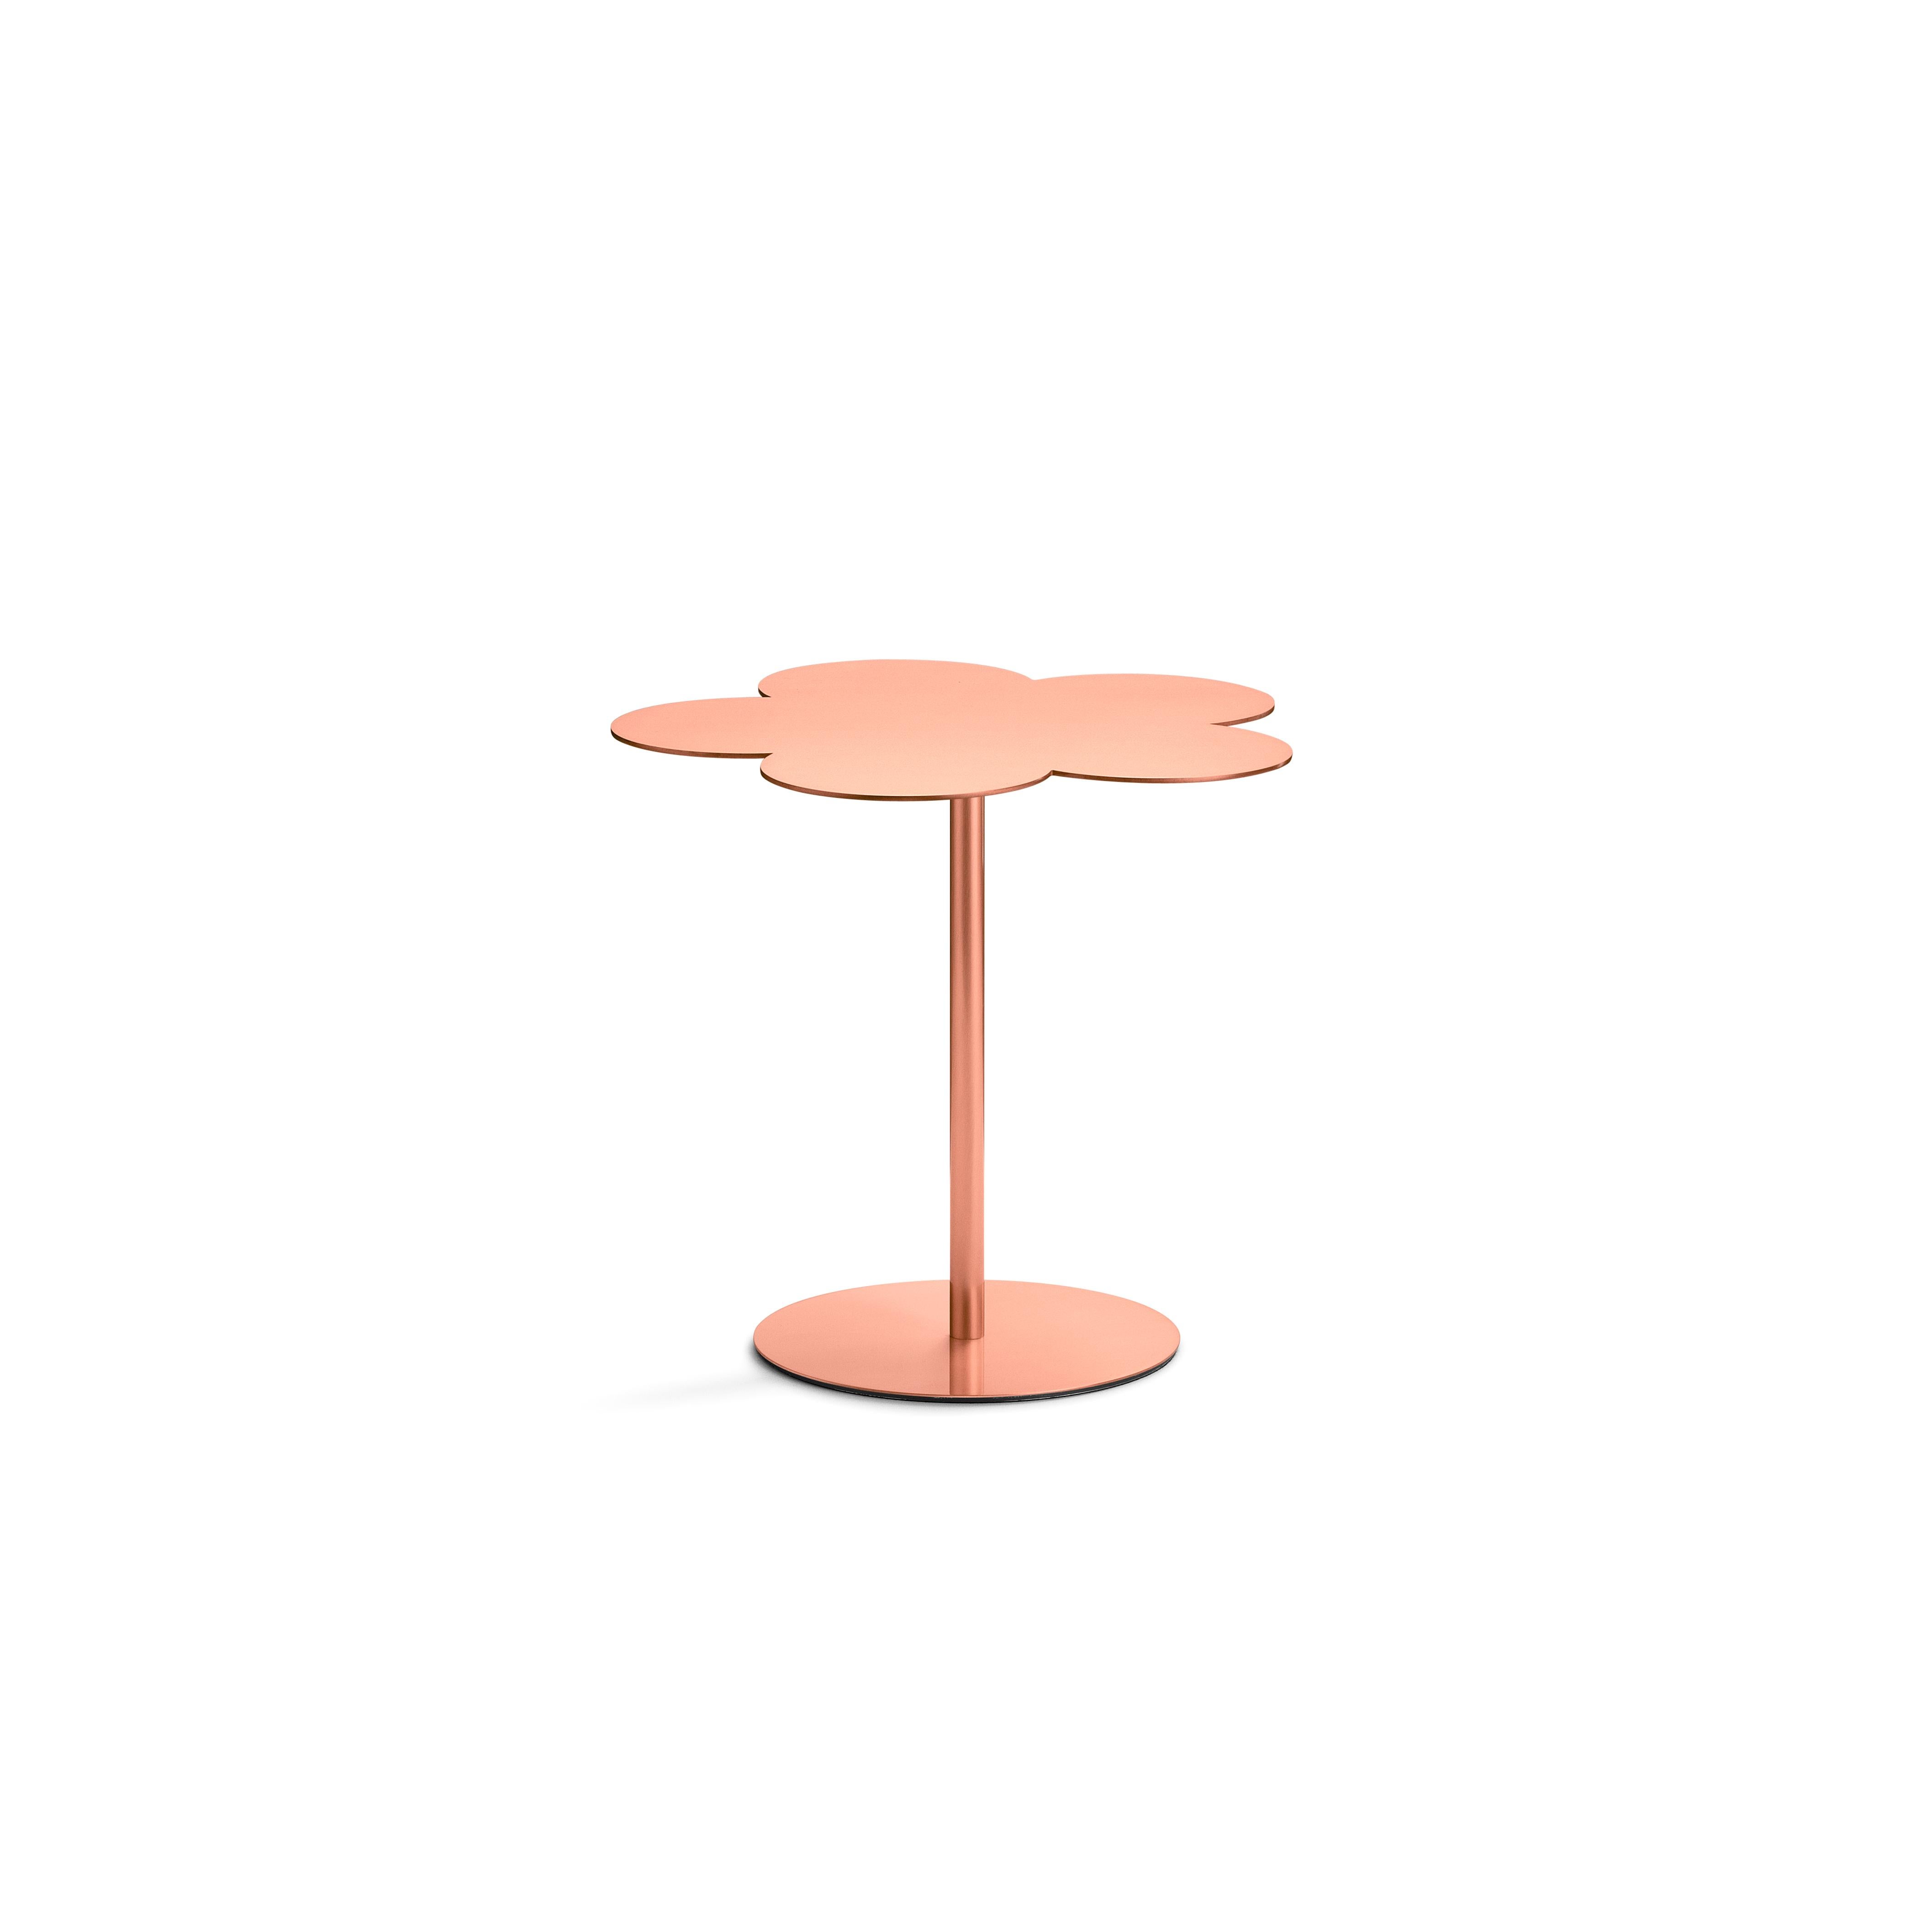 Medium coffee side table
The natural element is the focus of this project of a coffee table where the surface is shaped like a stylized flower. A triptych of distinct elements which rest on a circular foot and, given the different heights, can be